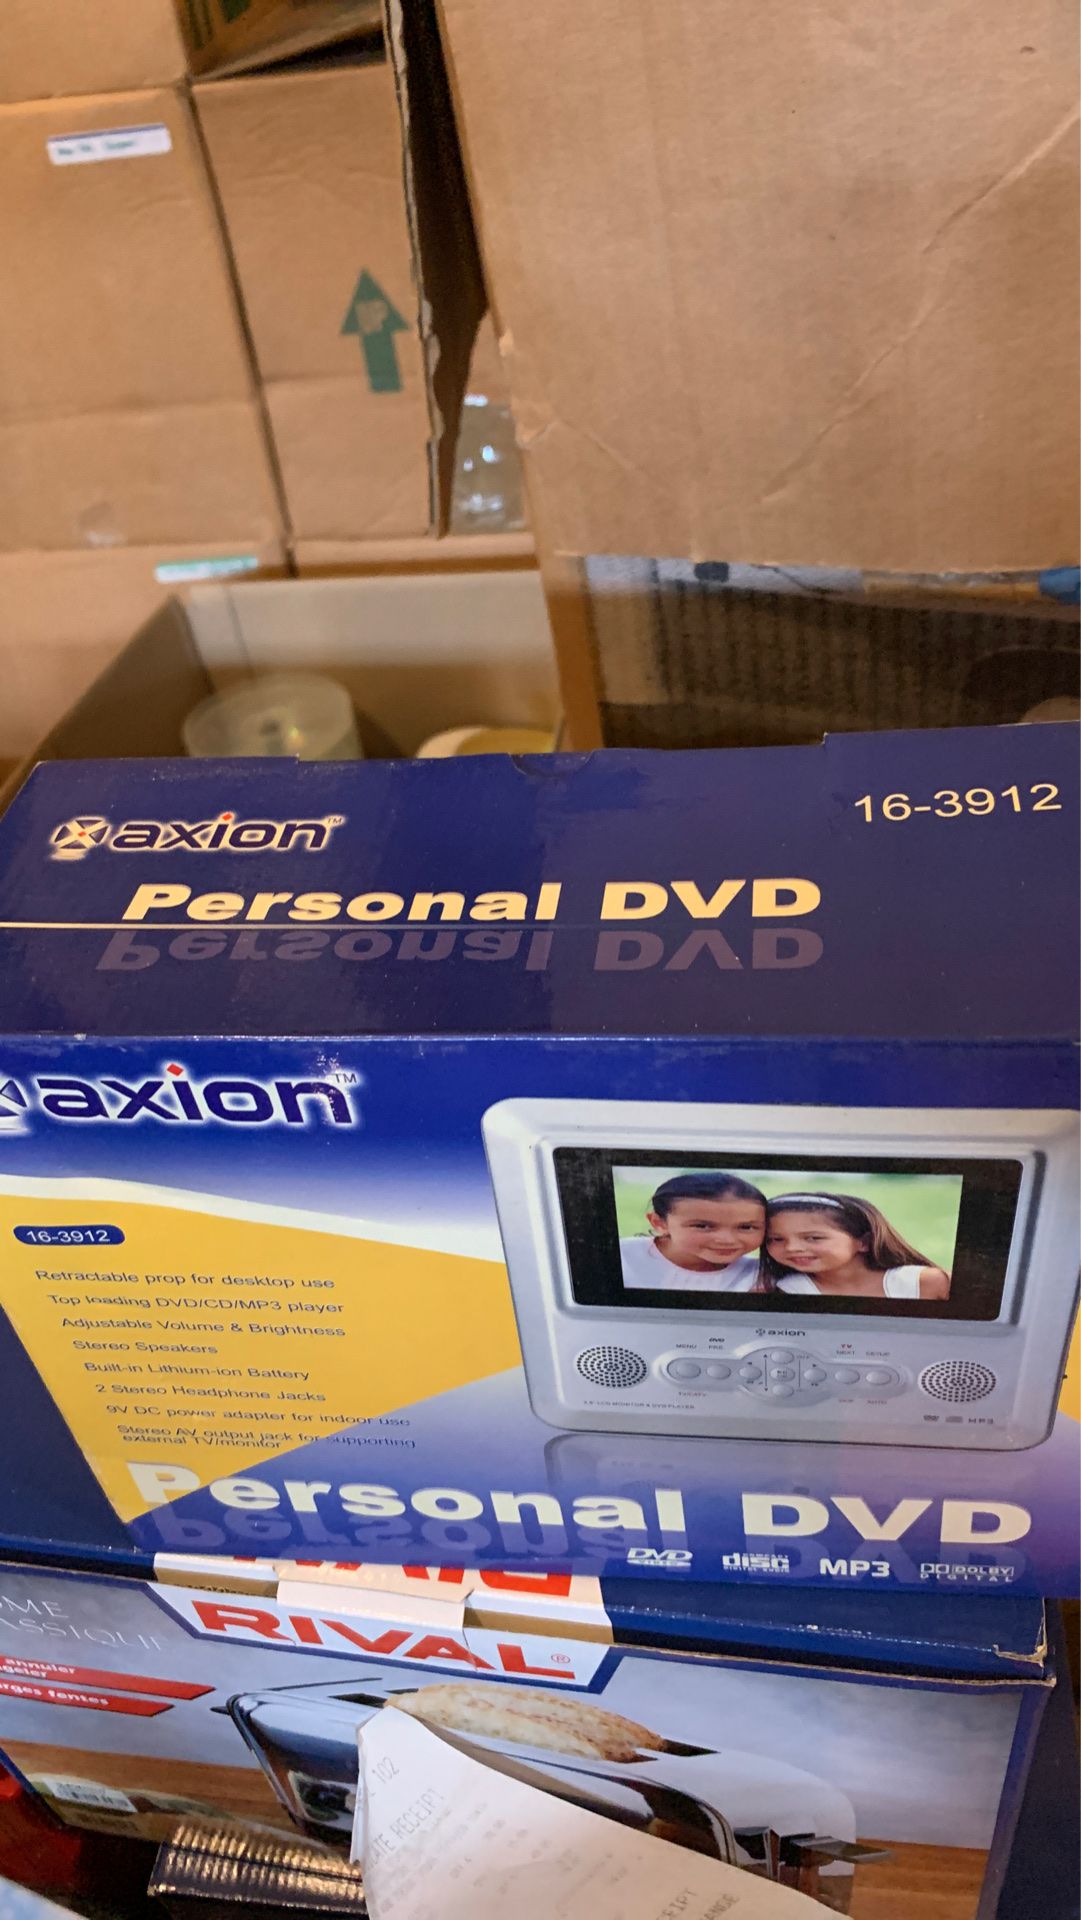 New: portable DVD player. 4.2